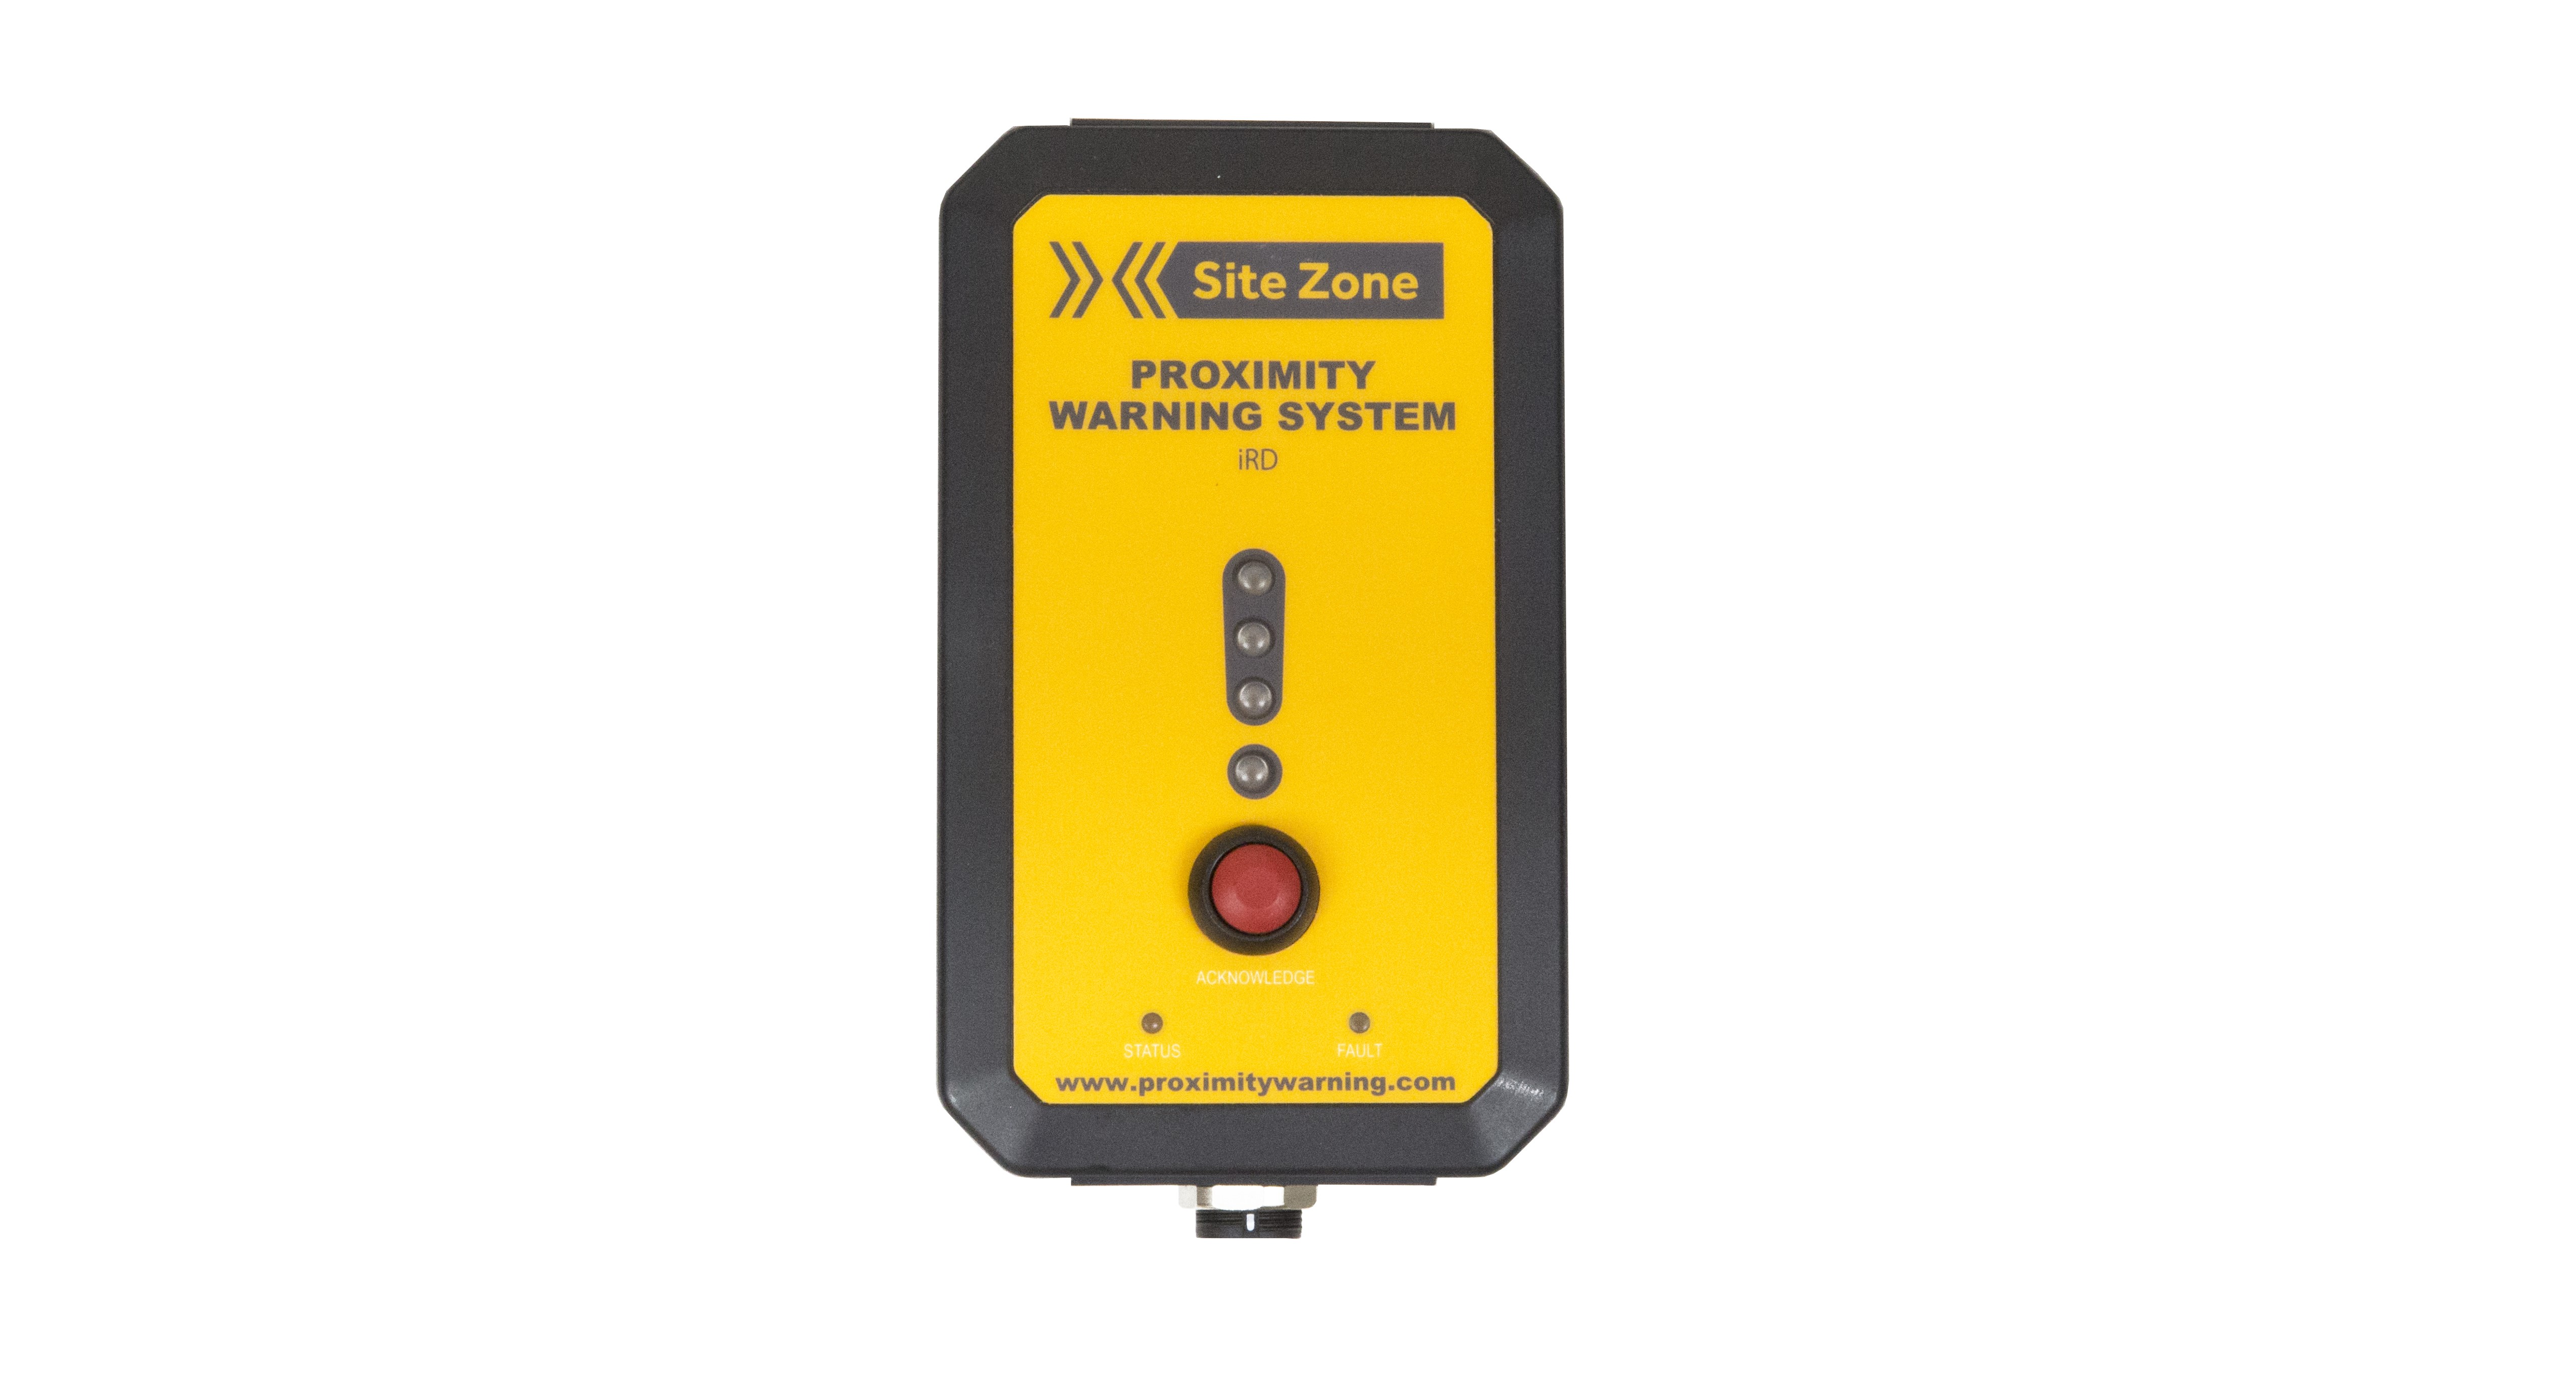 SiteZone-iNstant-Remote-Display-iRD-0S7A9734-cropped